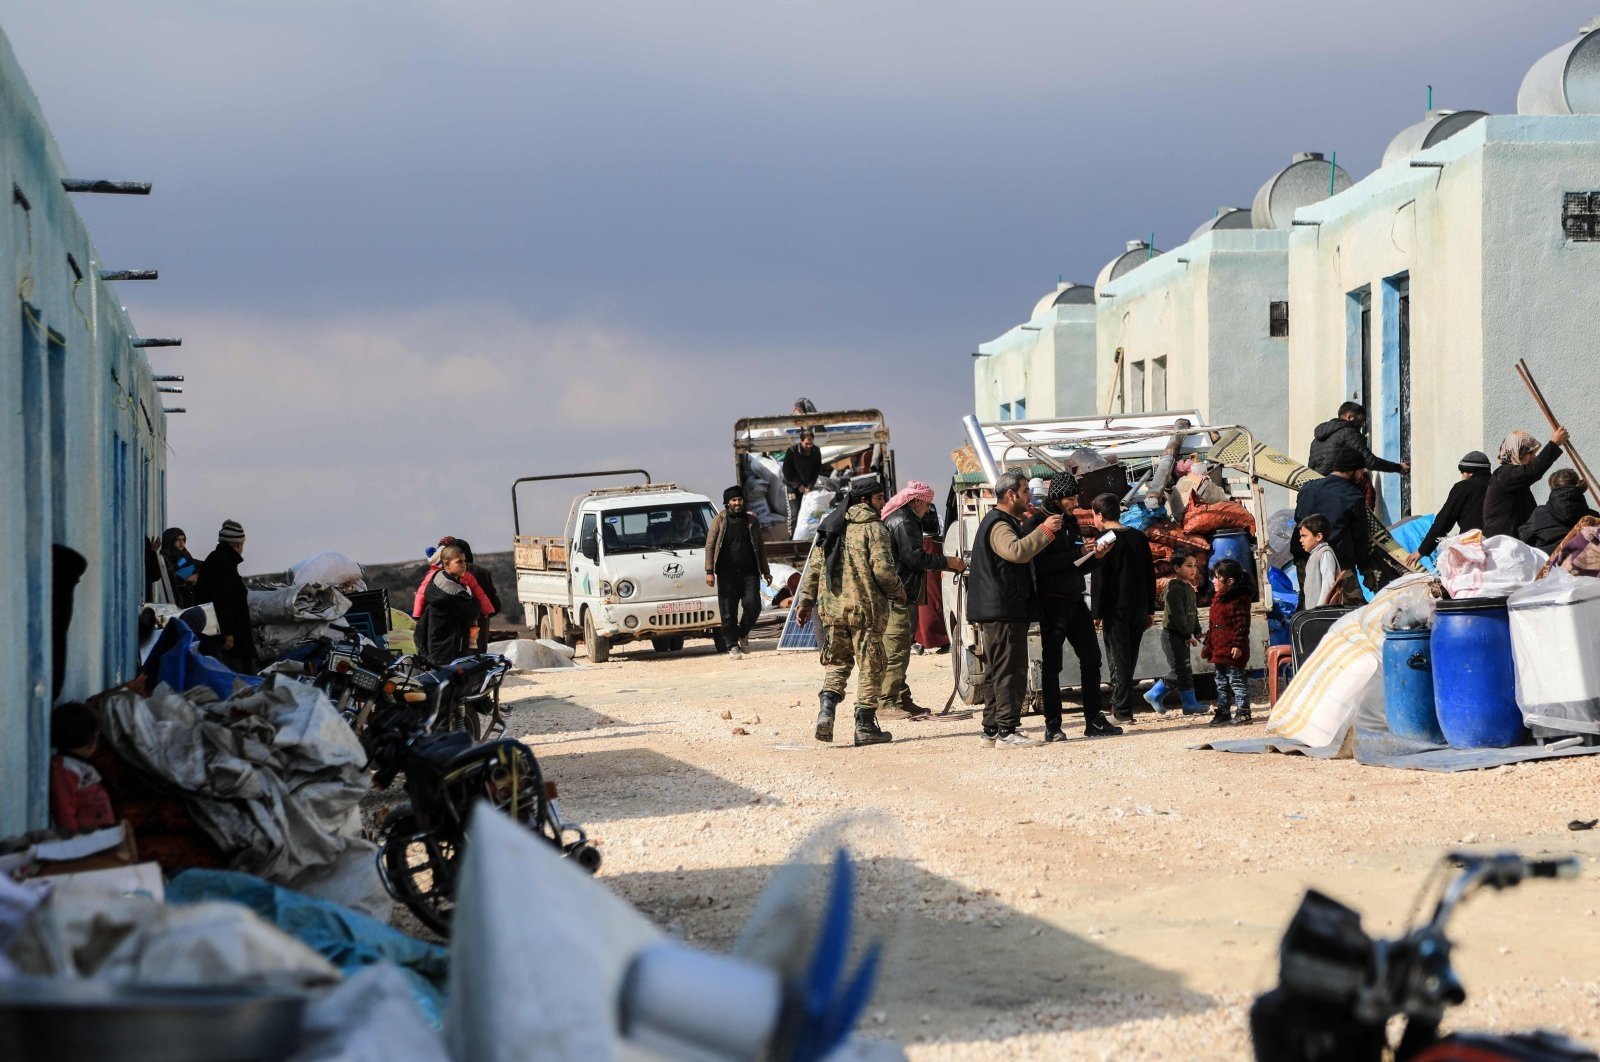 Syrians unload their belongings from trucks upon arrival at a new housing complex built with the support of Türkiye&#039;s emergencies agency AFAD, in the opposition-held area of Bizaah, east of the city of al-Bab in the northern Aleppo governorate, Syria, on Feb. 9, 2022 (AFP Photo)